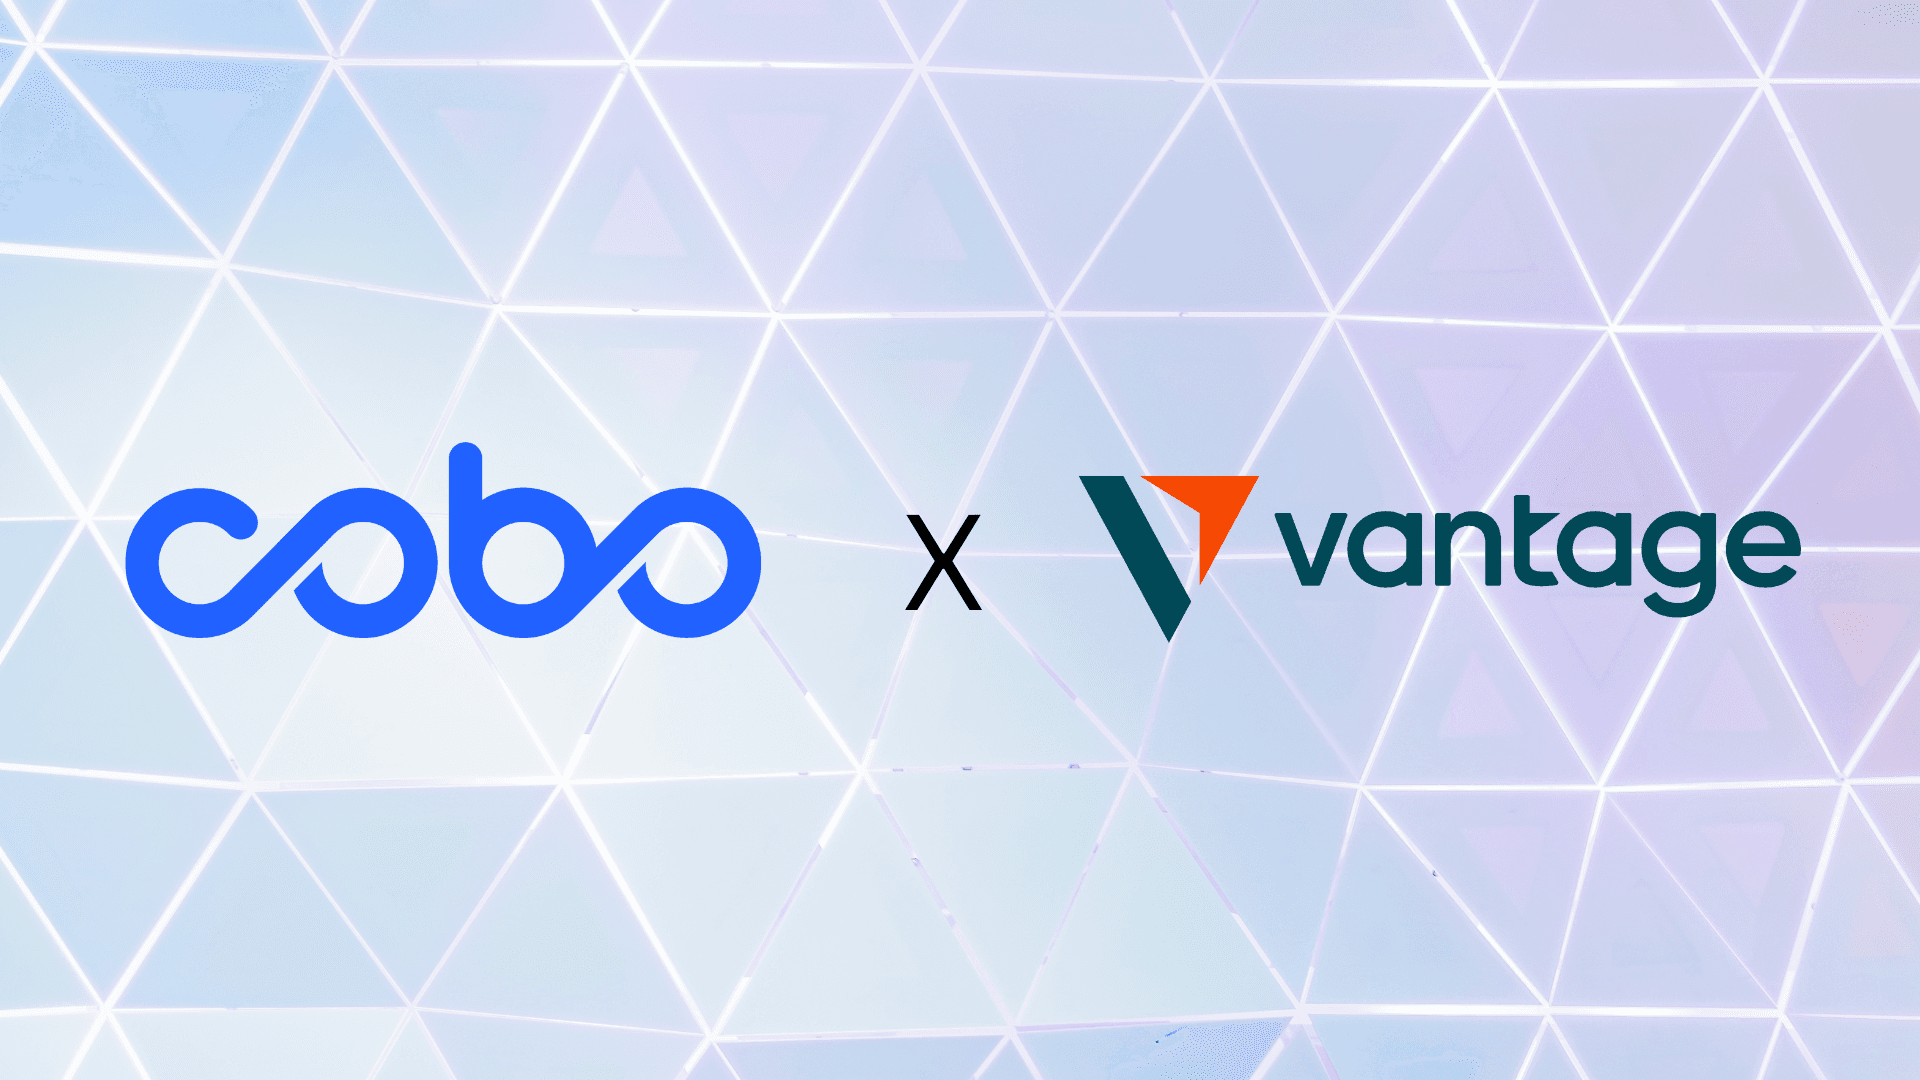 Leading Multi-Asset Broker, Vantage Markets, Moves to Accept Crypto Payments, Enabled by Global Custody Technology Provider, Cobo